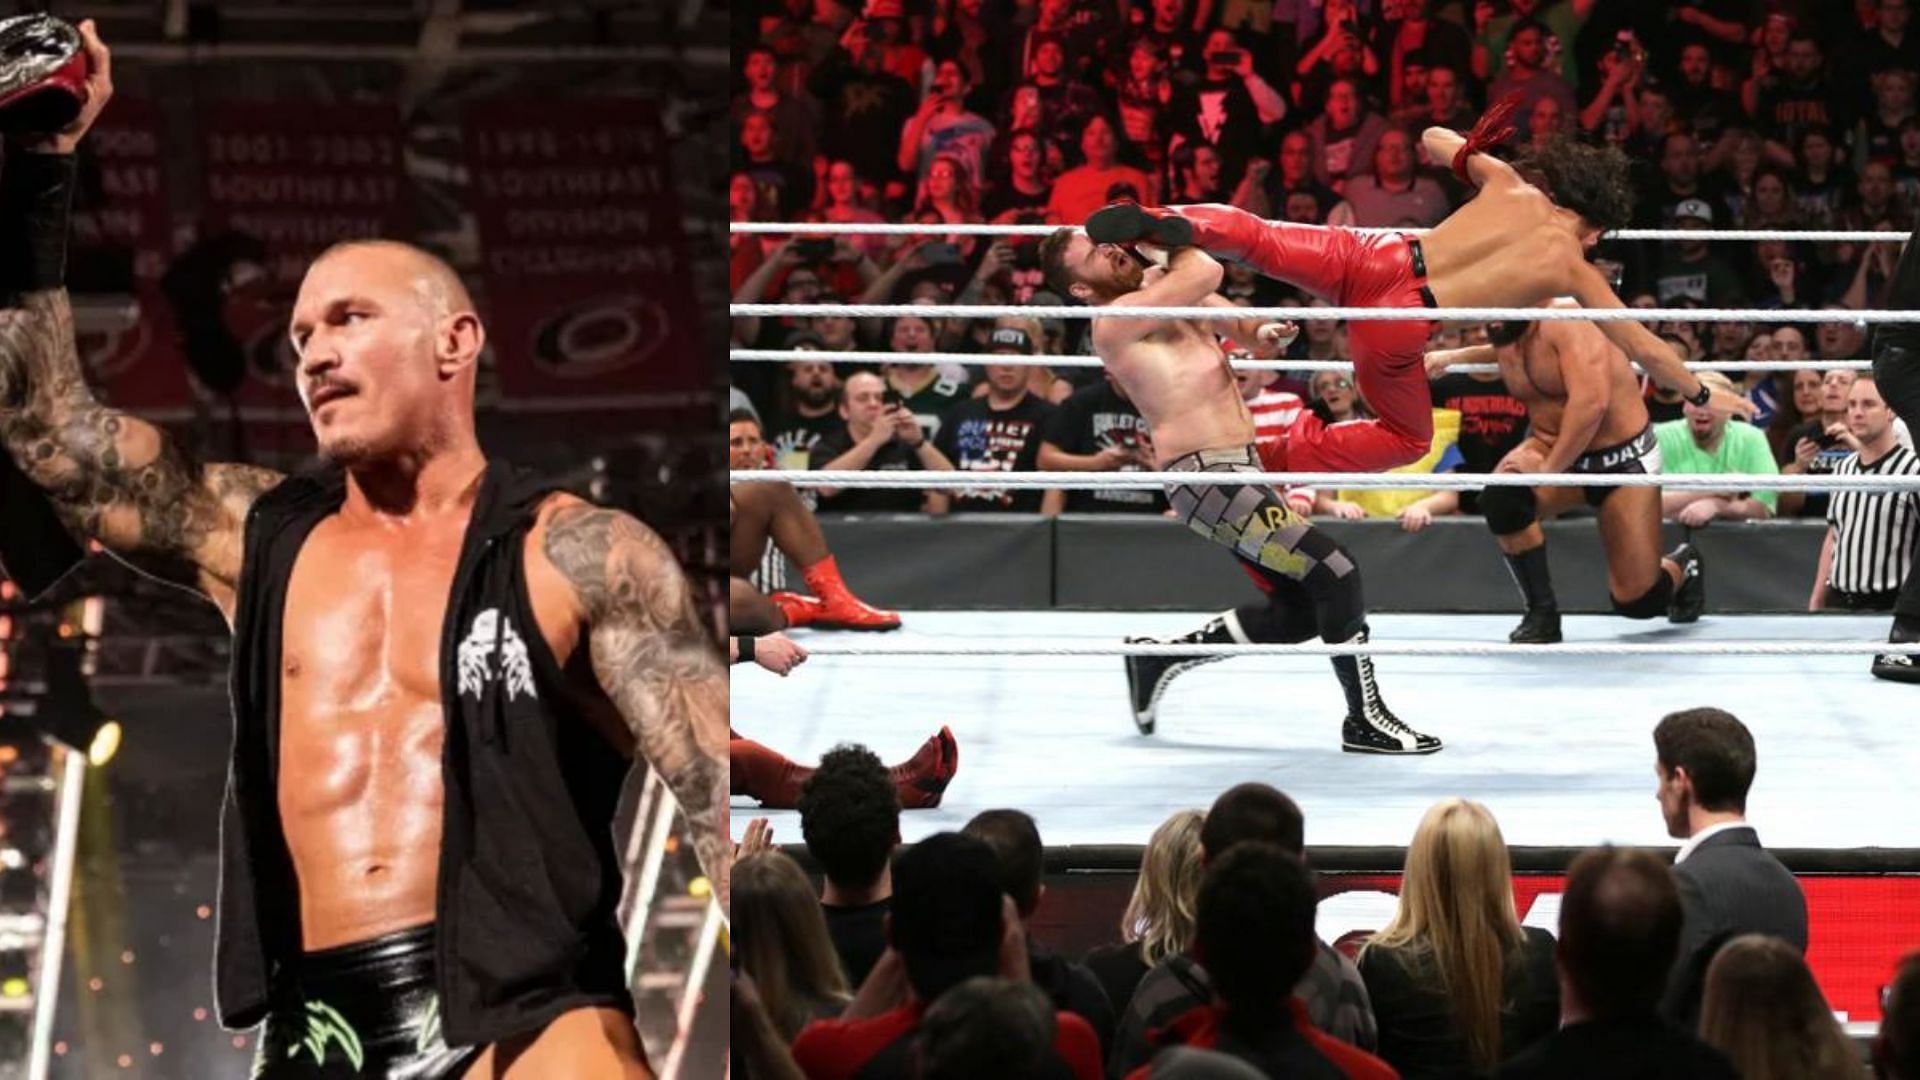 Randy Orton will not compete at WWE Royal Rumble 2023.